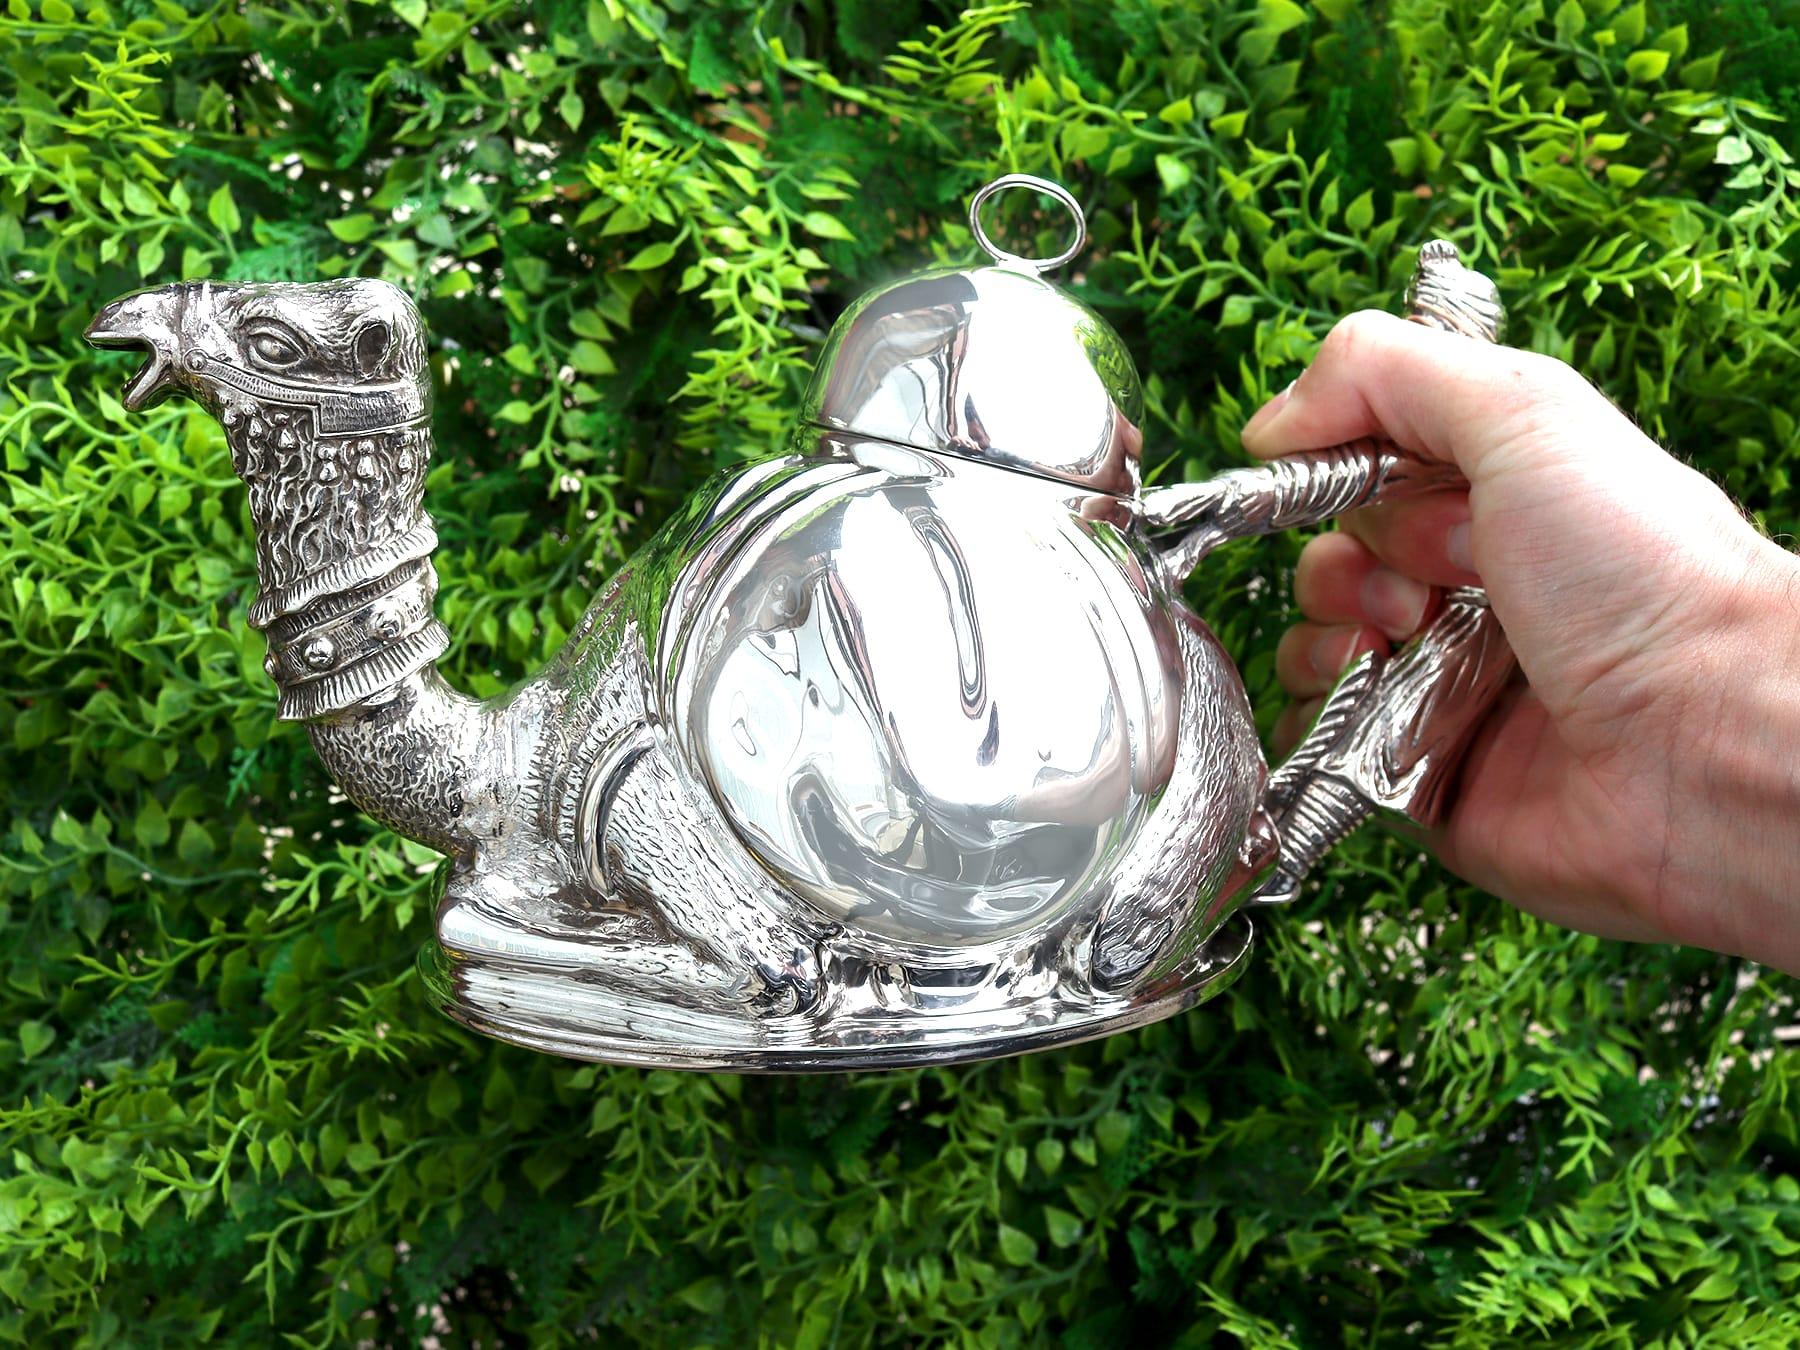 A magnificent, exceptional, fine and impressive vintage Italian sterling silver teapot modelled in the form of a camel; an addition to our silver teaware collection.

This magnificent vintage cast Italian sterling silver teapot has been